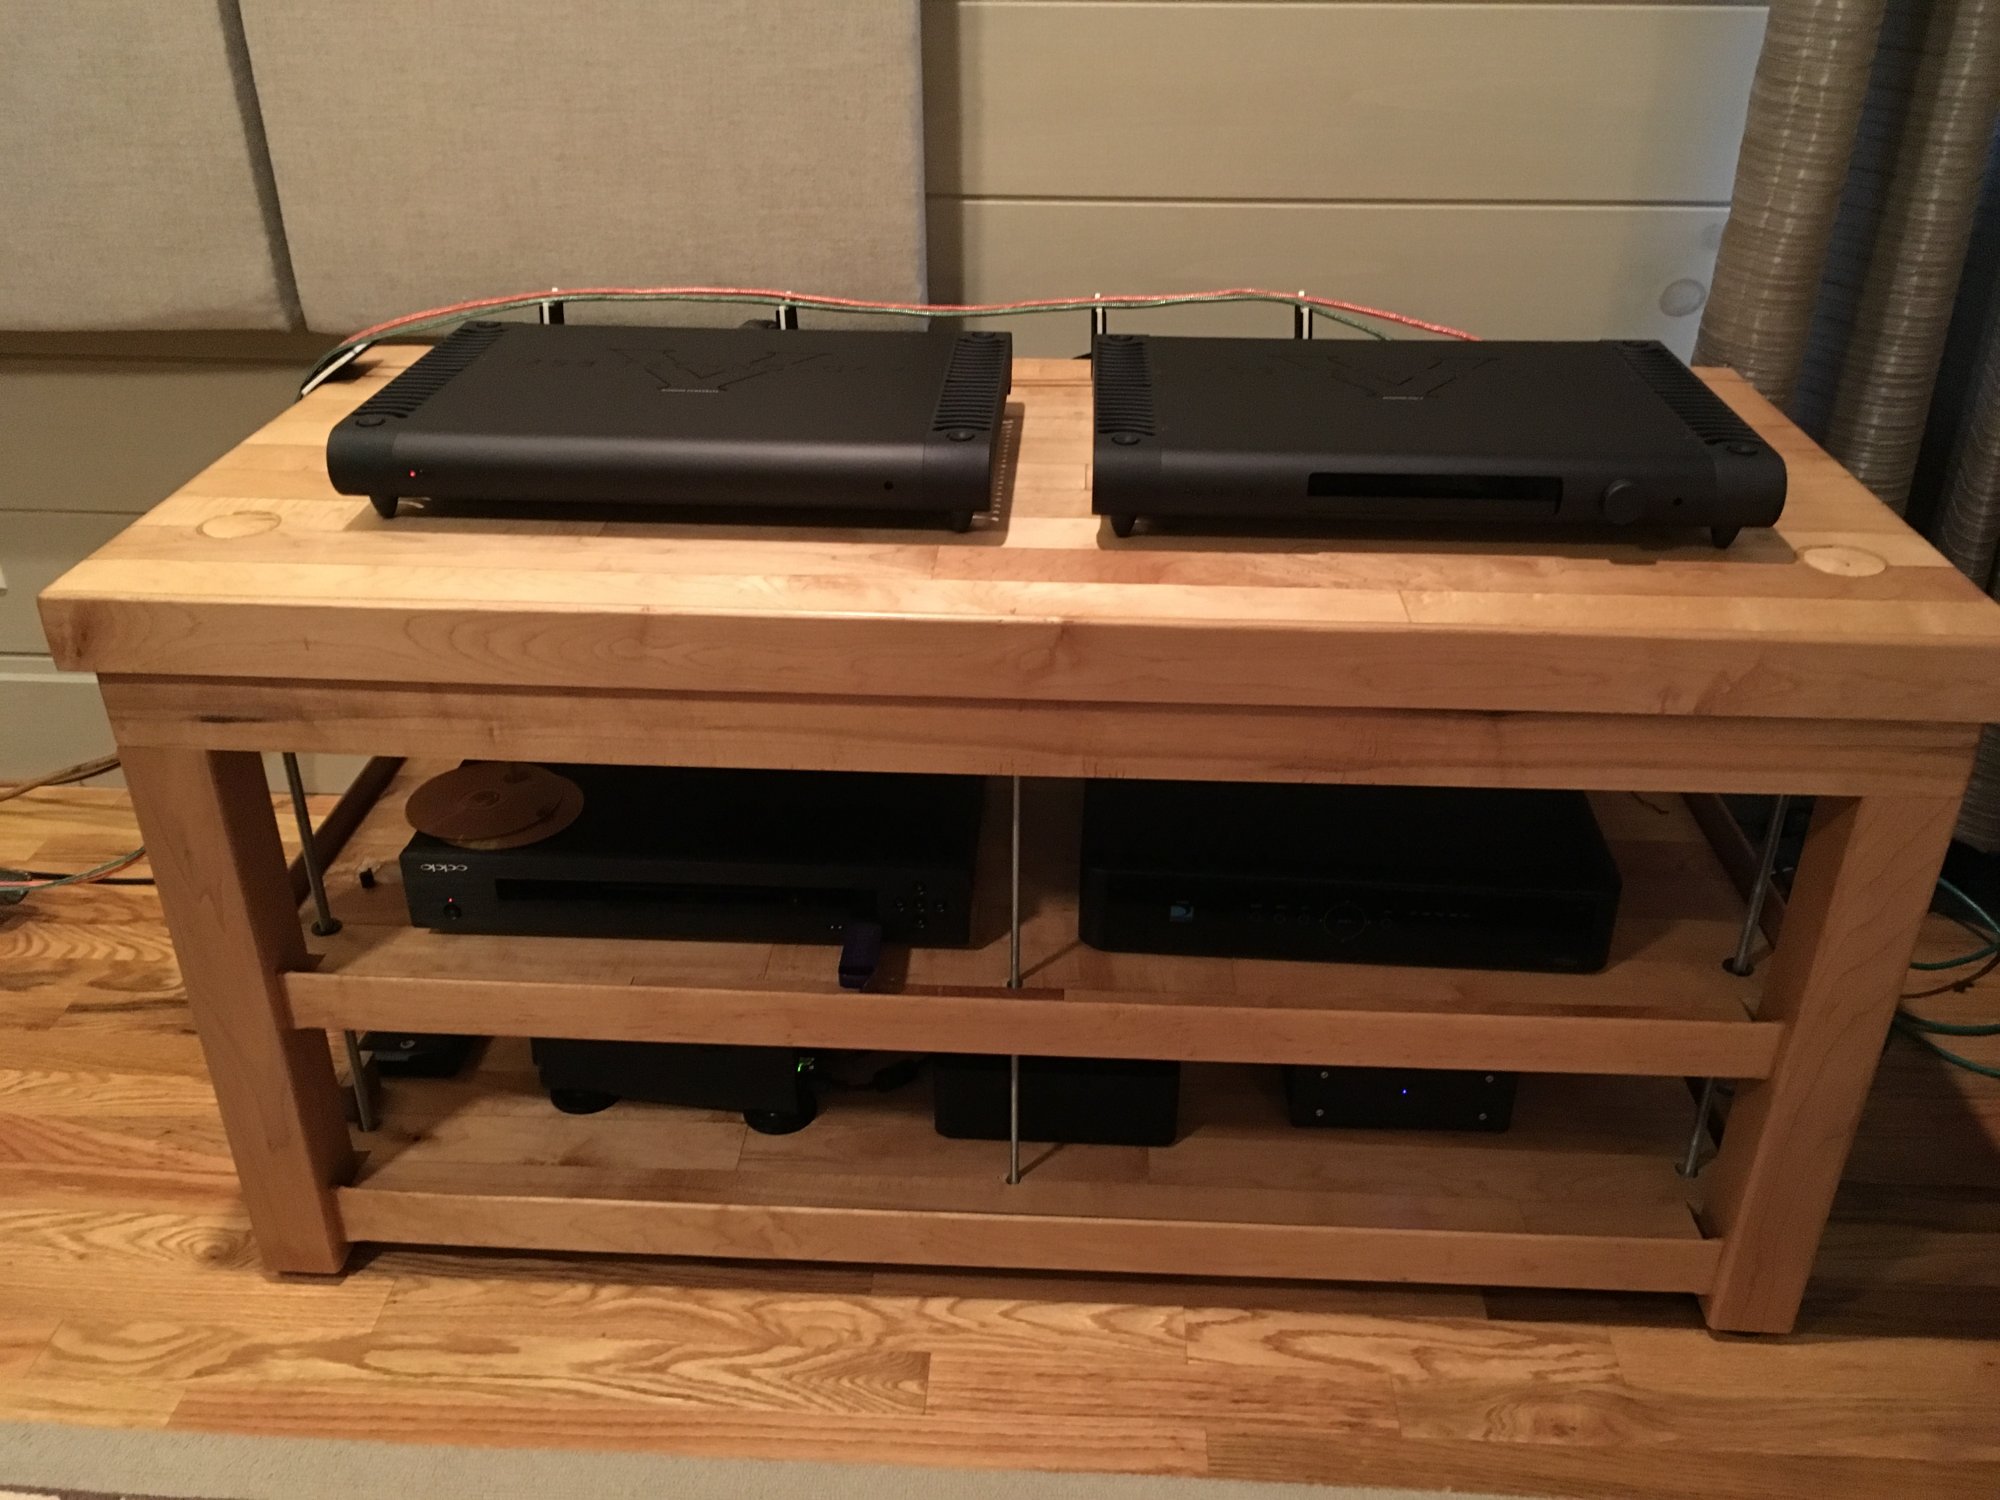 MSB, homemade air suspension table